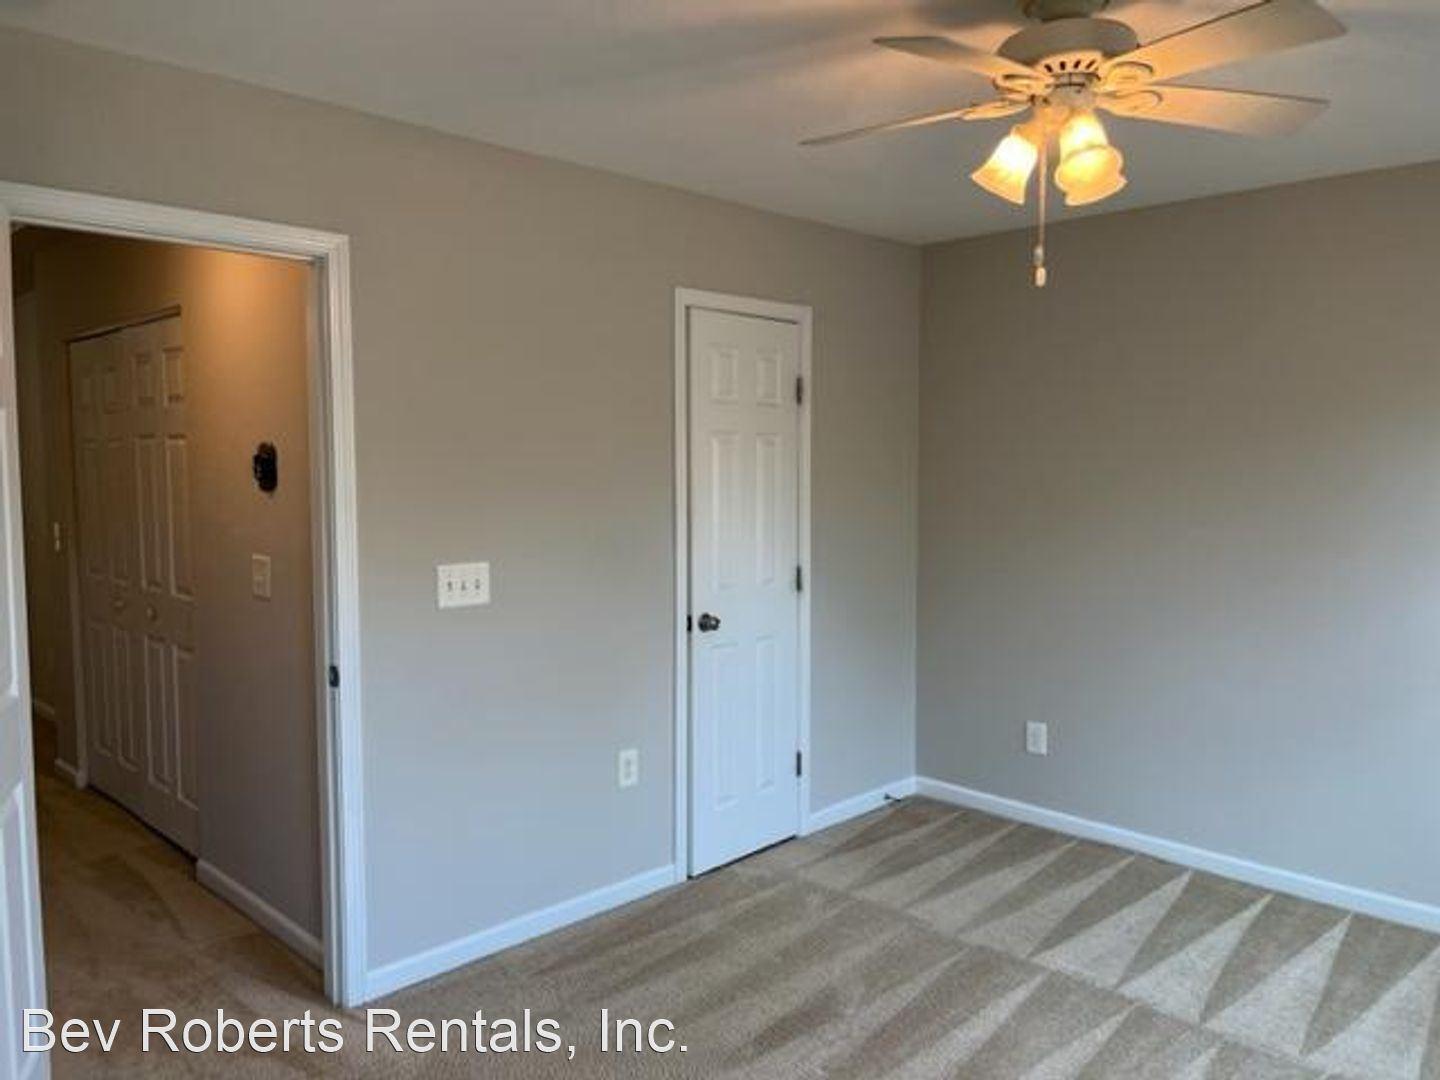 Photo 23 of 28 of 3022 Berkeley Springs Place (UnitID 12375674) townhome